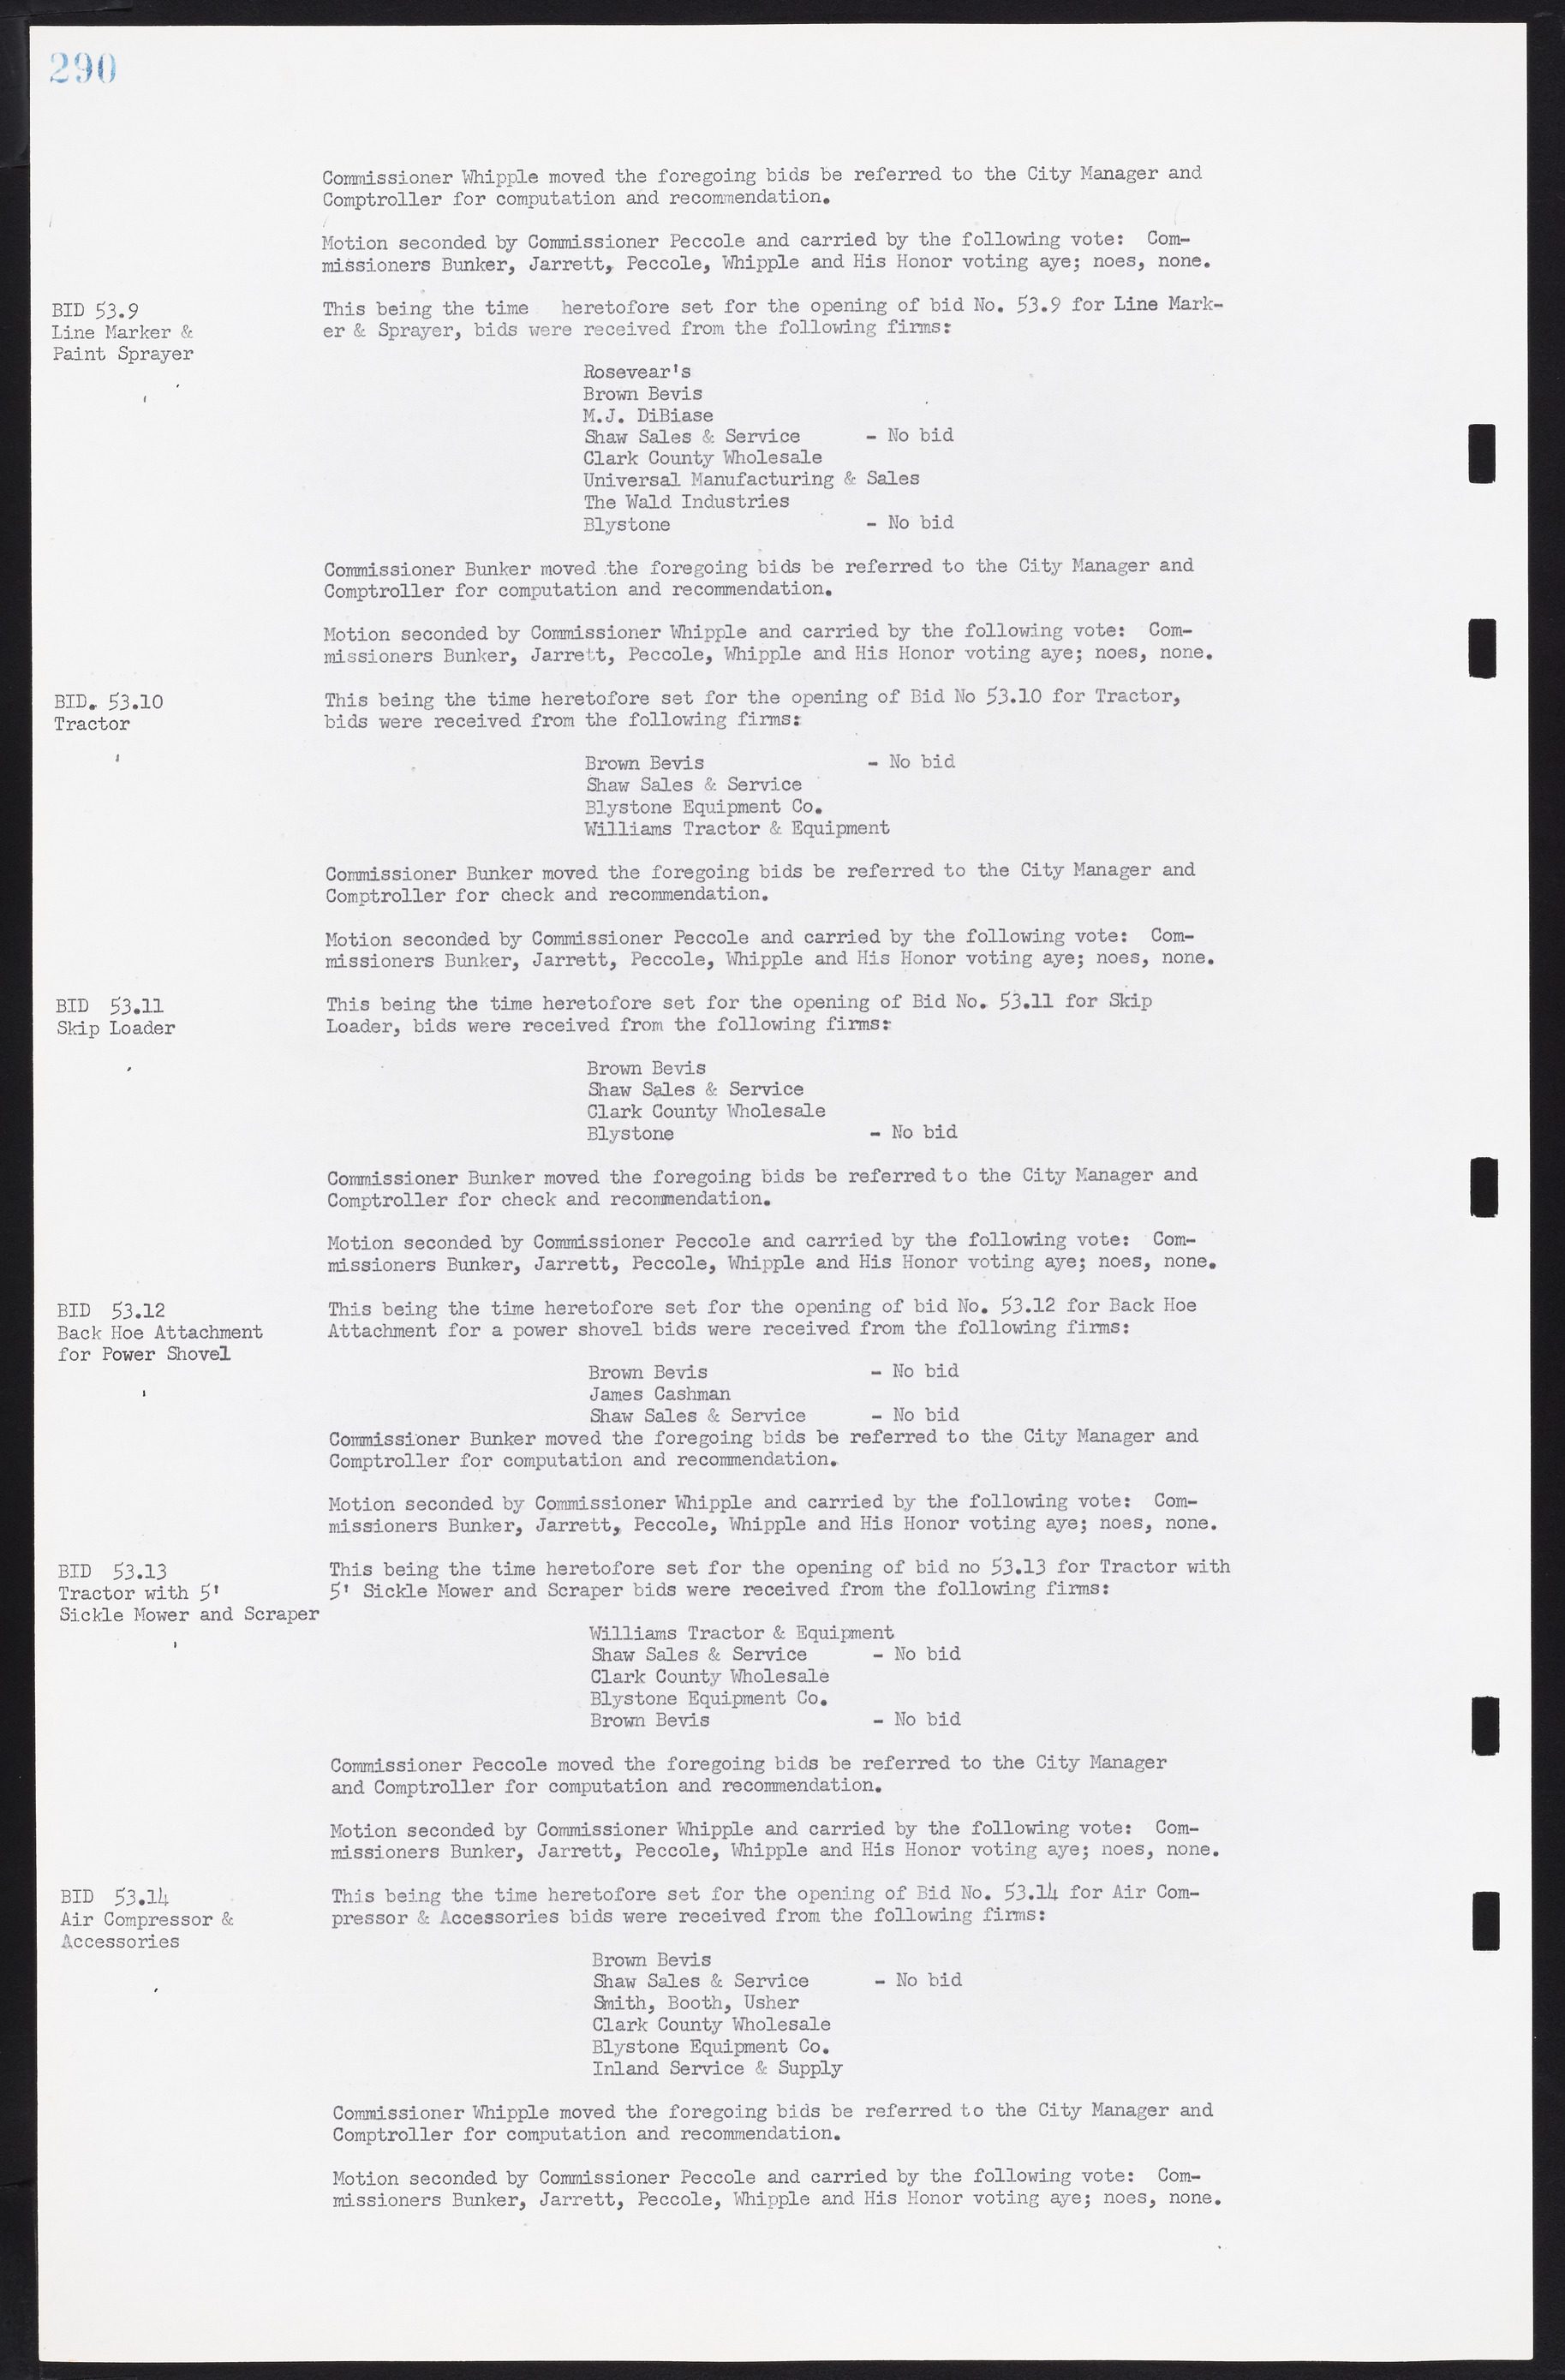 Las Vegas City Commission Minutes, May 26, 1952 to February 17, 1954, lvc000008-318